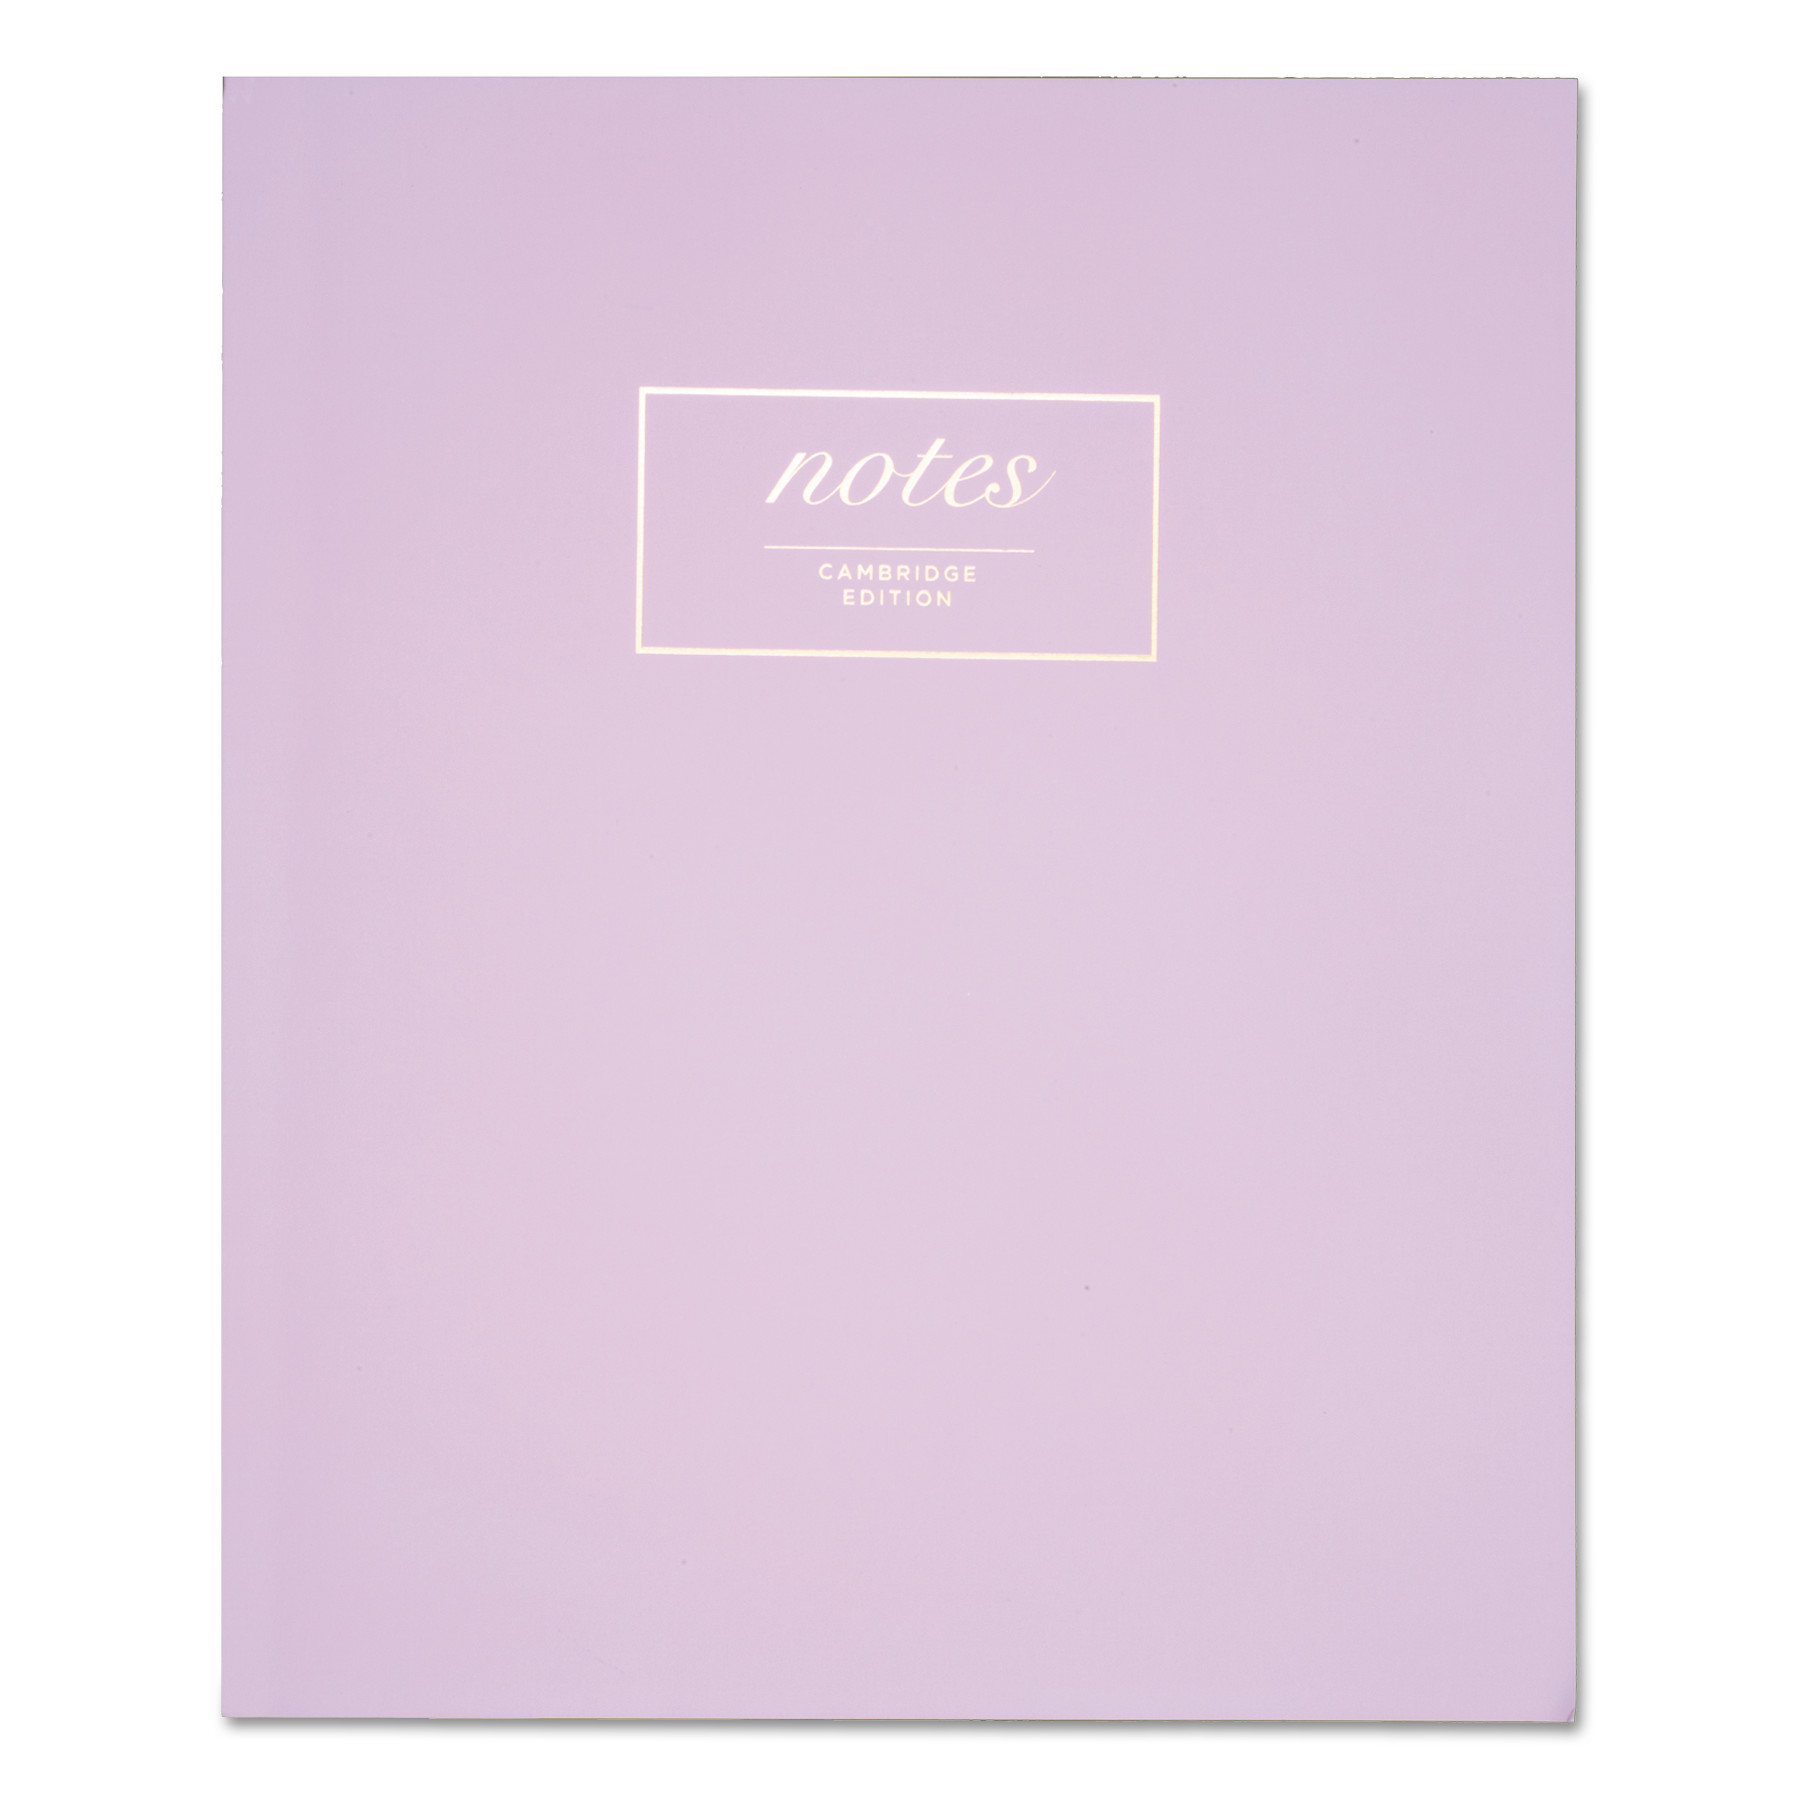  Cambridge 59291 Workstyle Notebook, 1 Subject, Wide/Legal Rule, Lavender Cover, 11 x 9, 80 Sheets (MEA59291) 